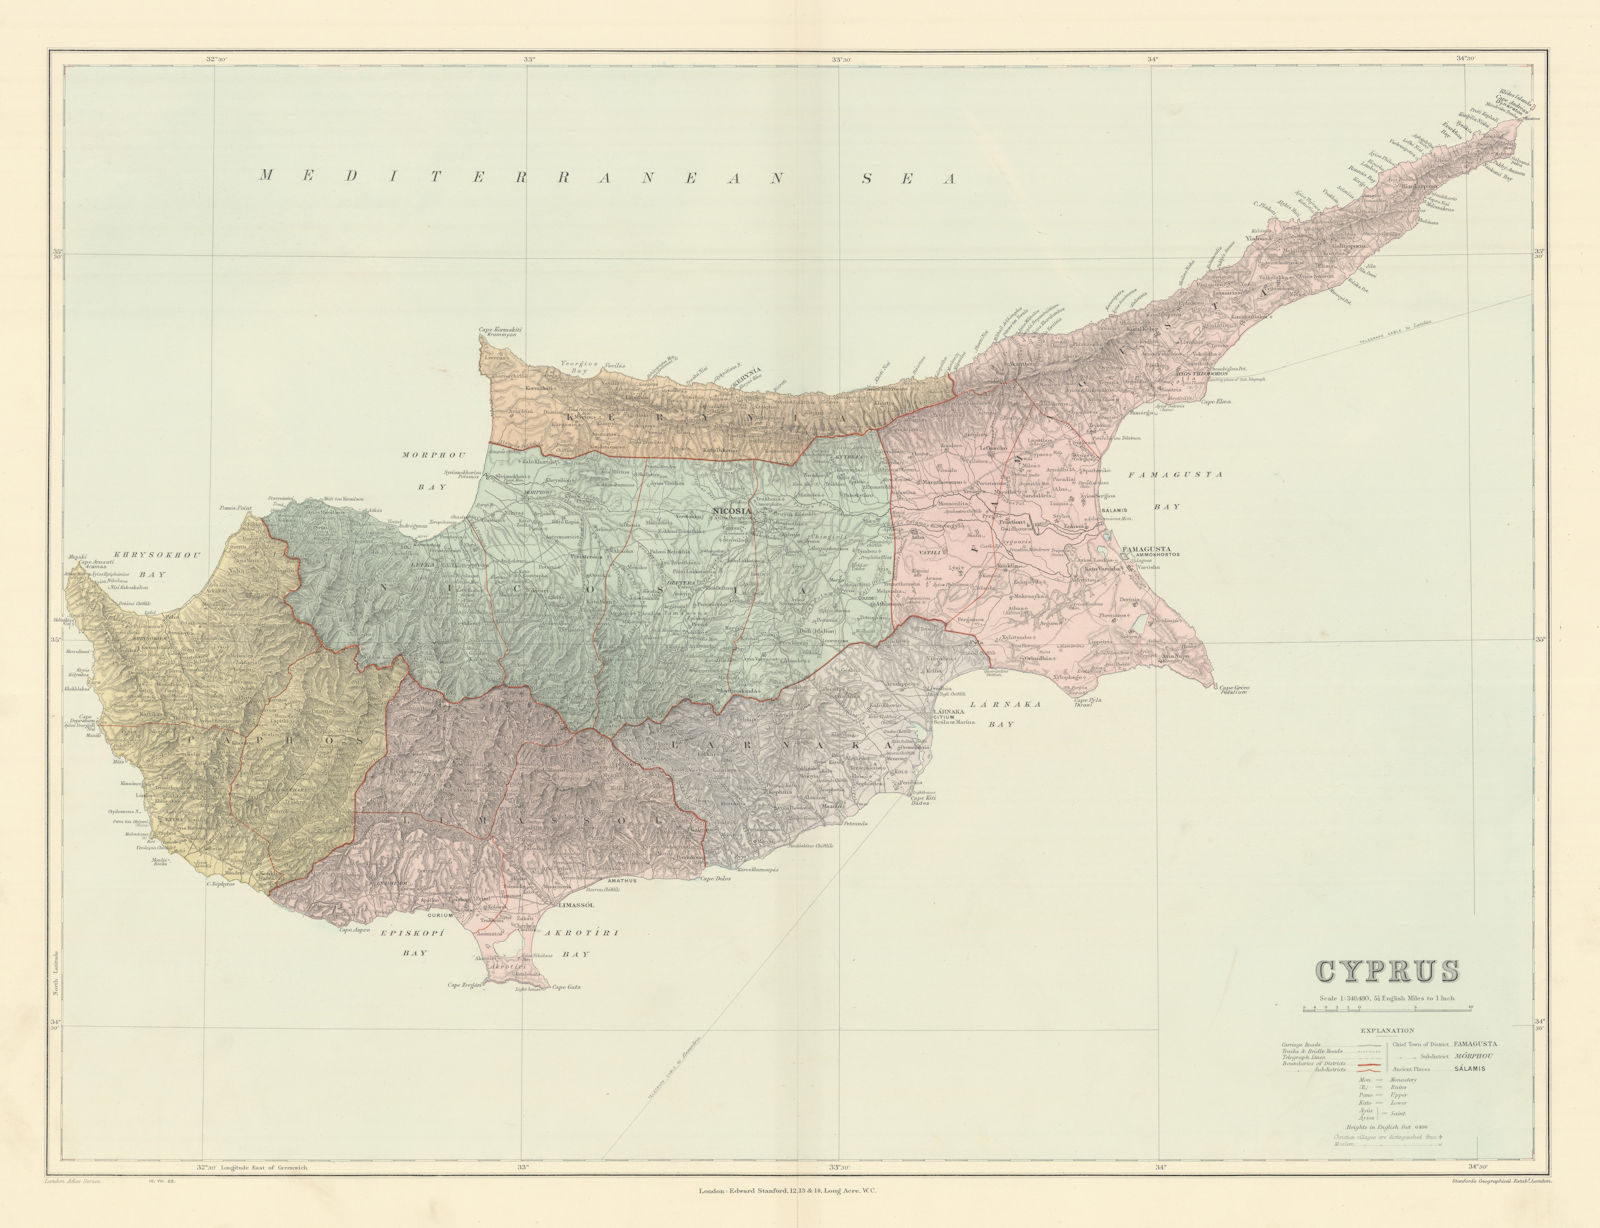 Cyprus. Districts. Ancient sites. Large 51x66cm. STANFORD 1904 old antique map